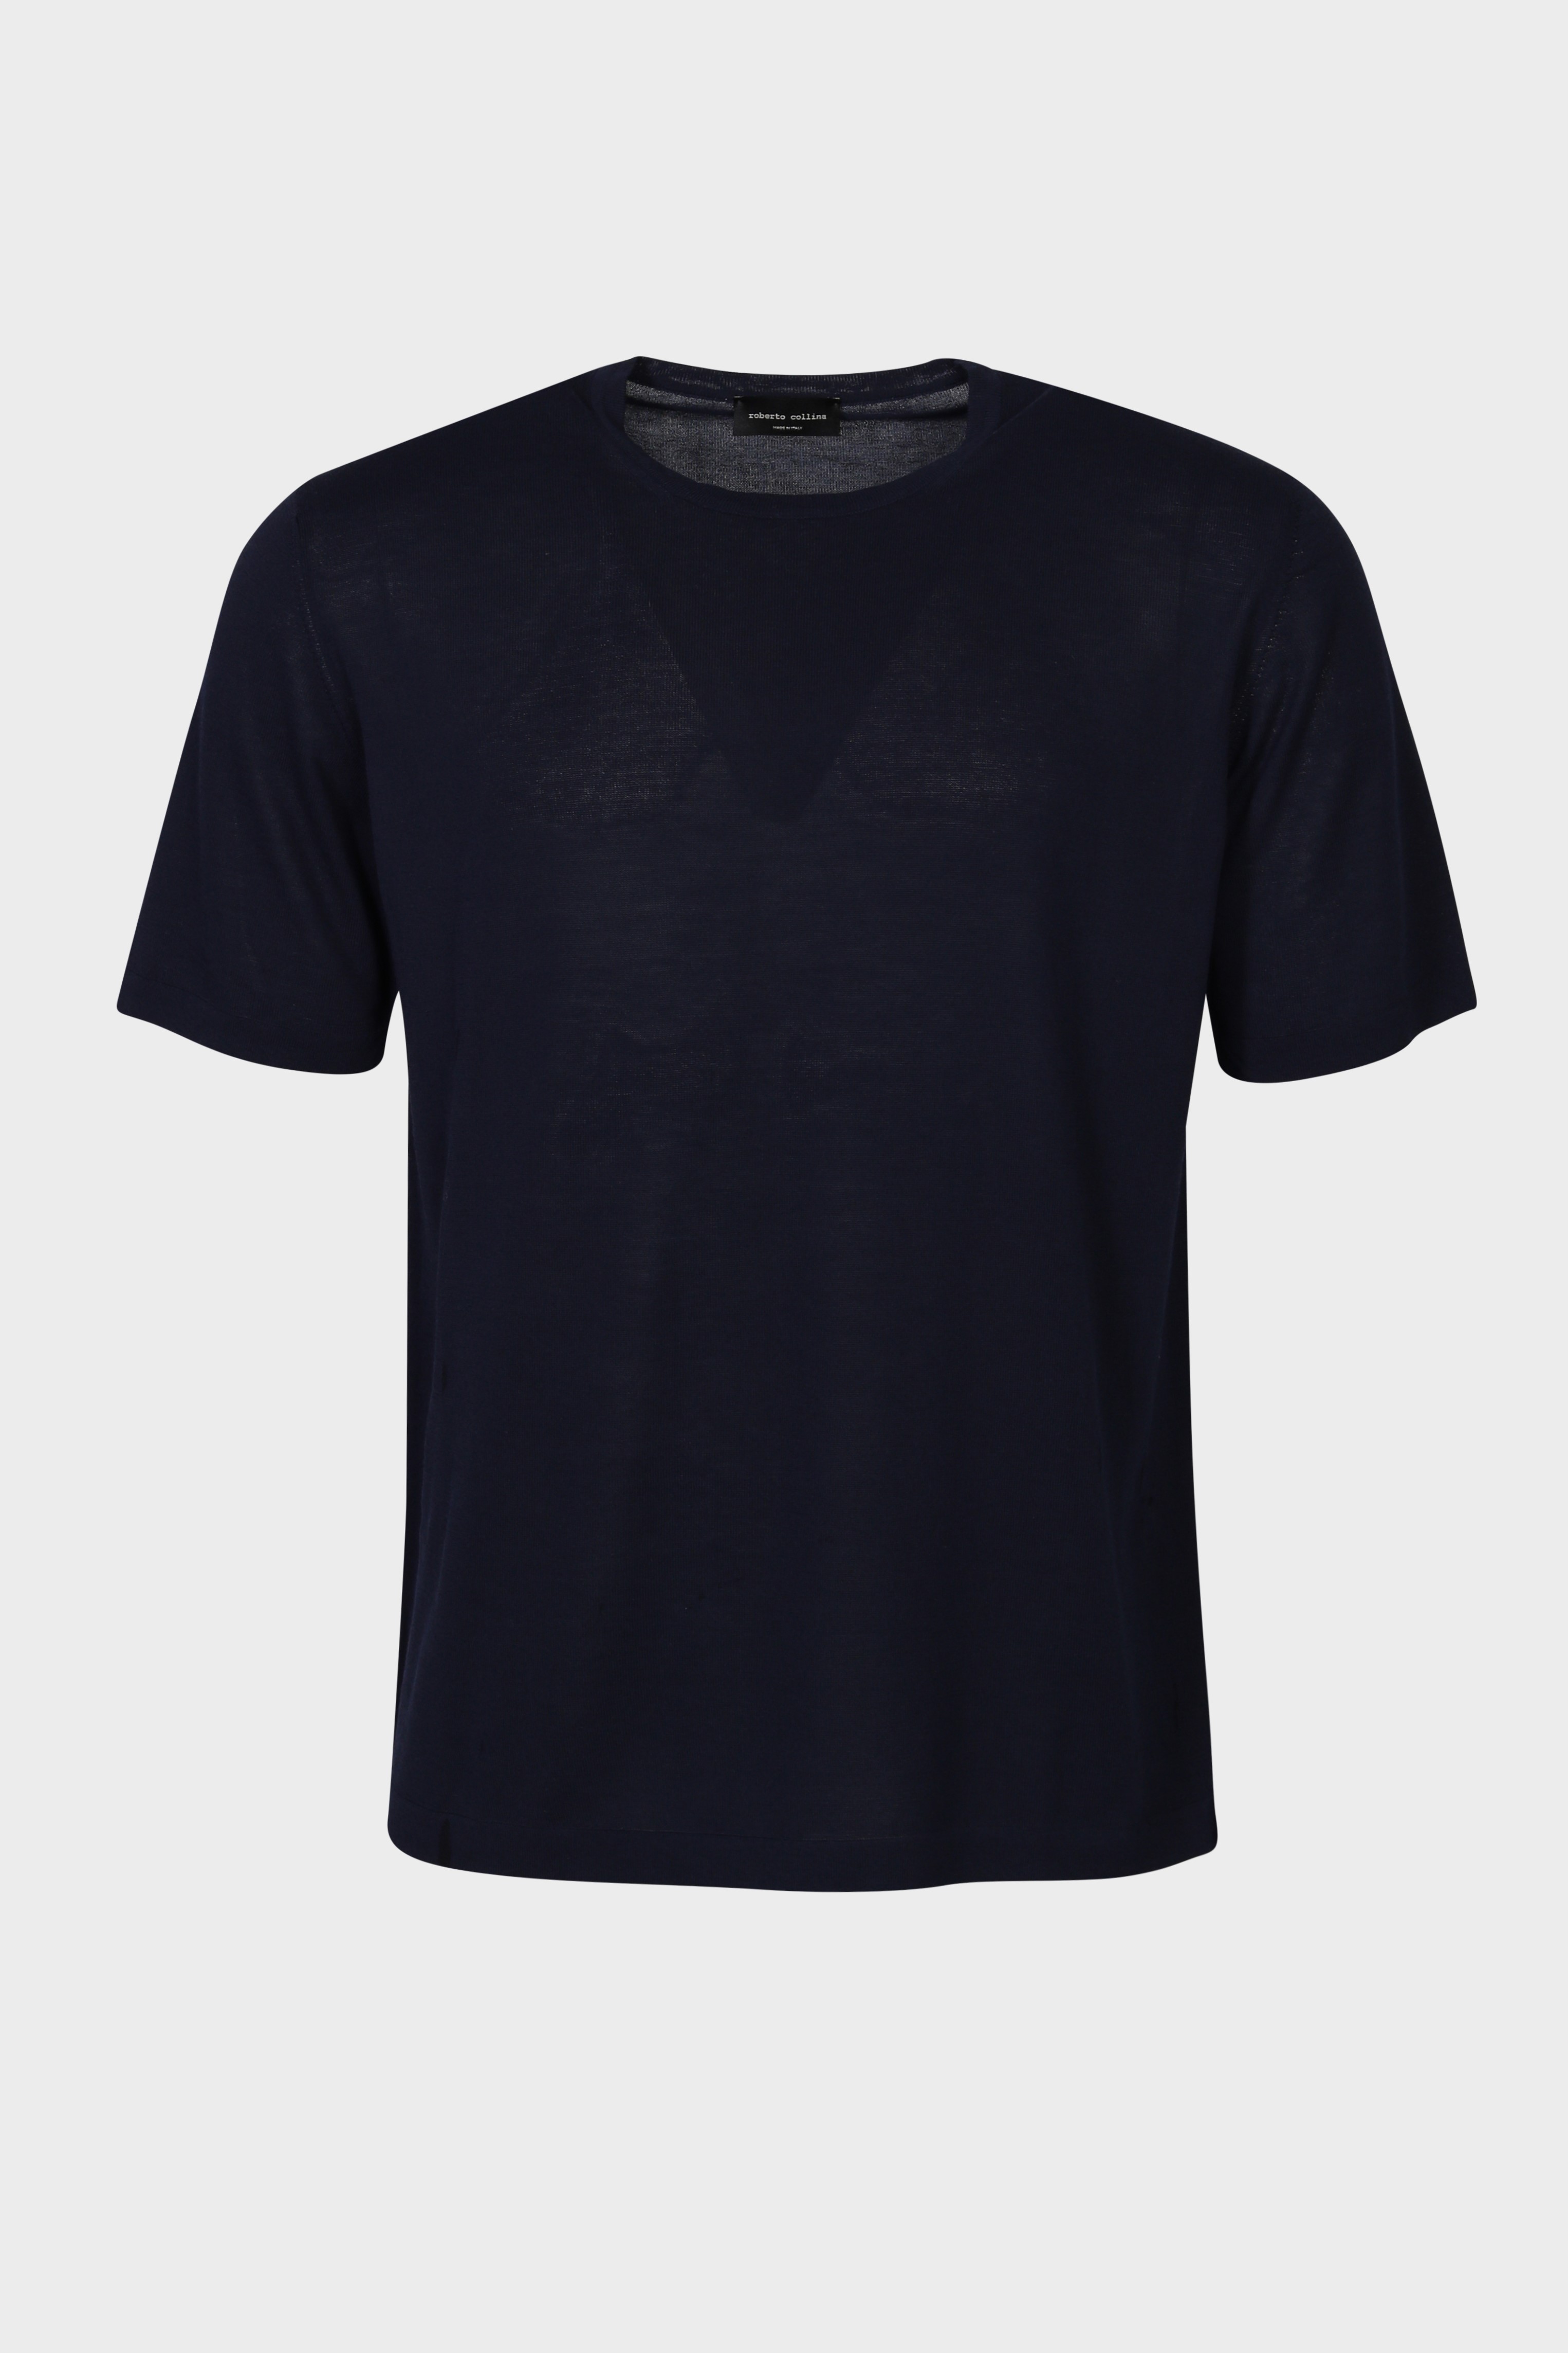 ROBERTO COLLINA Cotton Knit T-Shirt in Navy 54